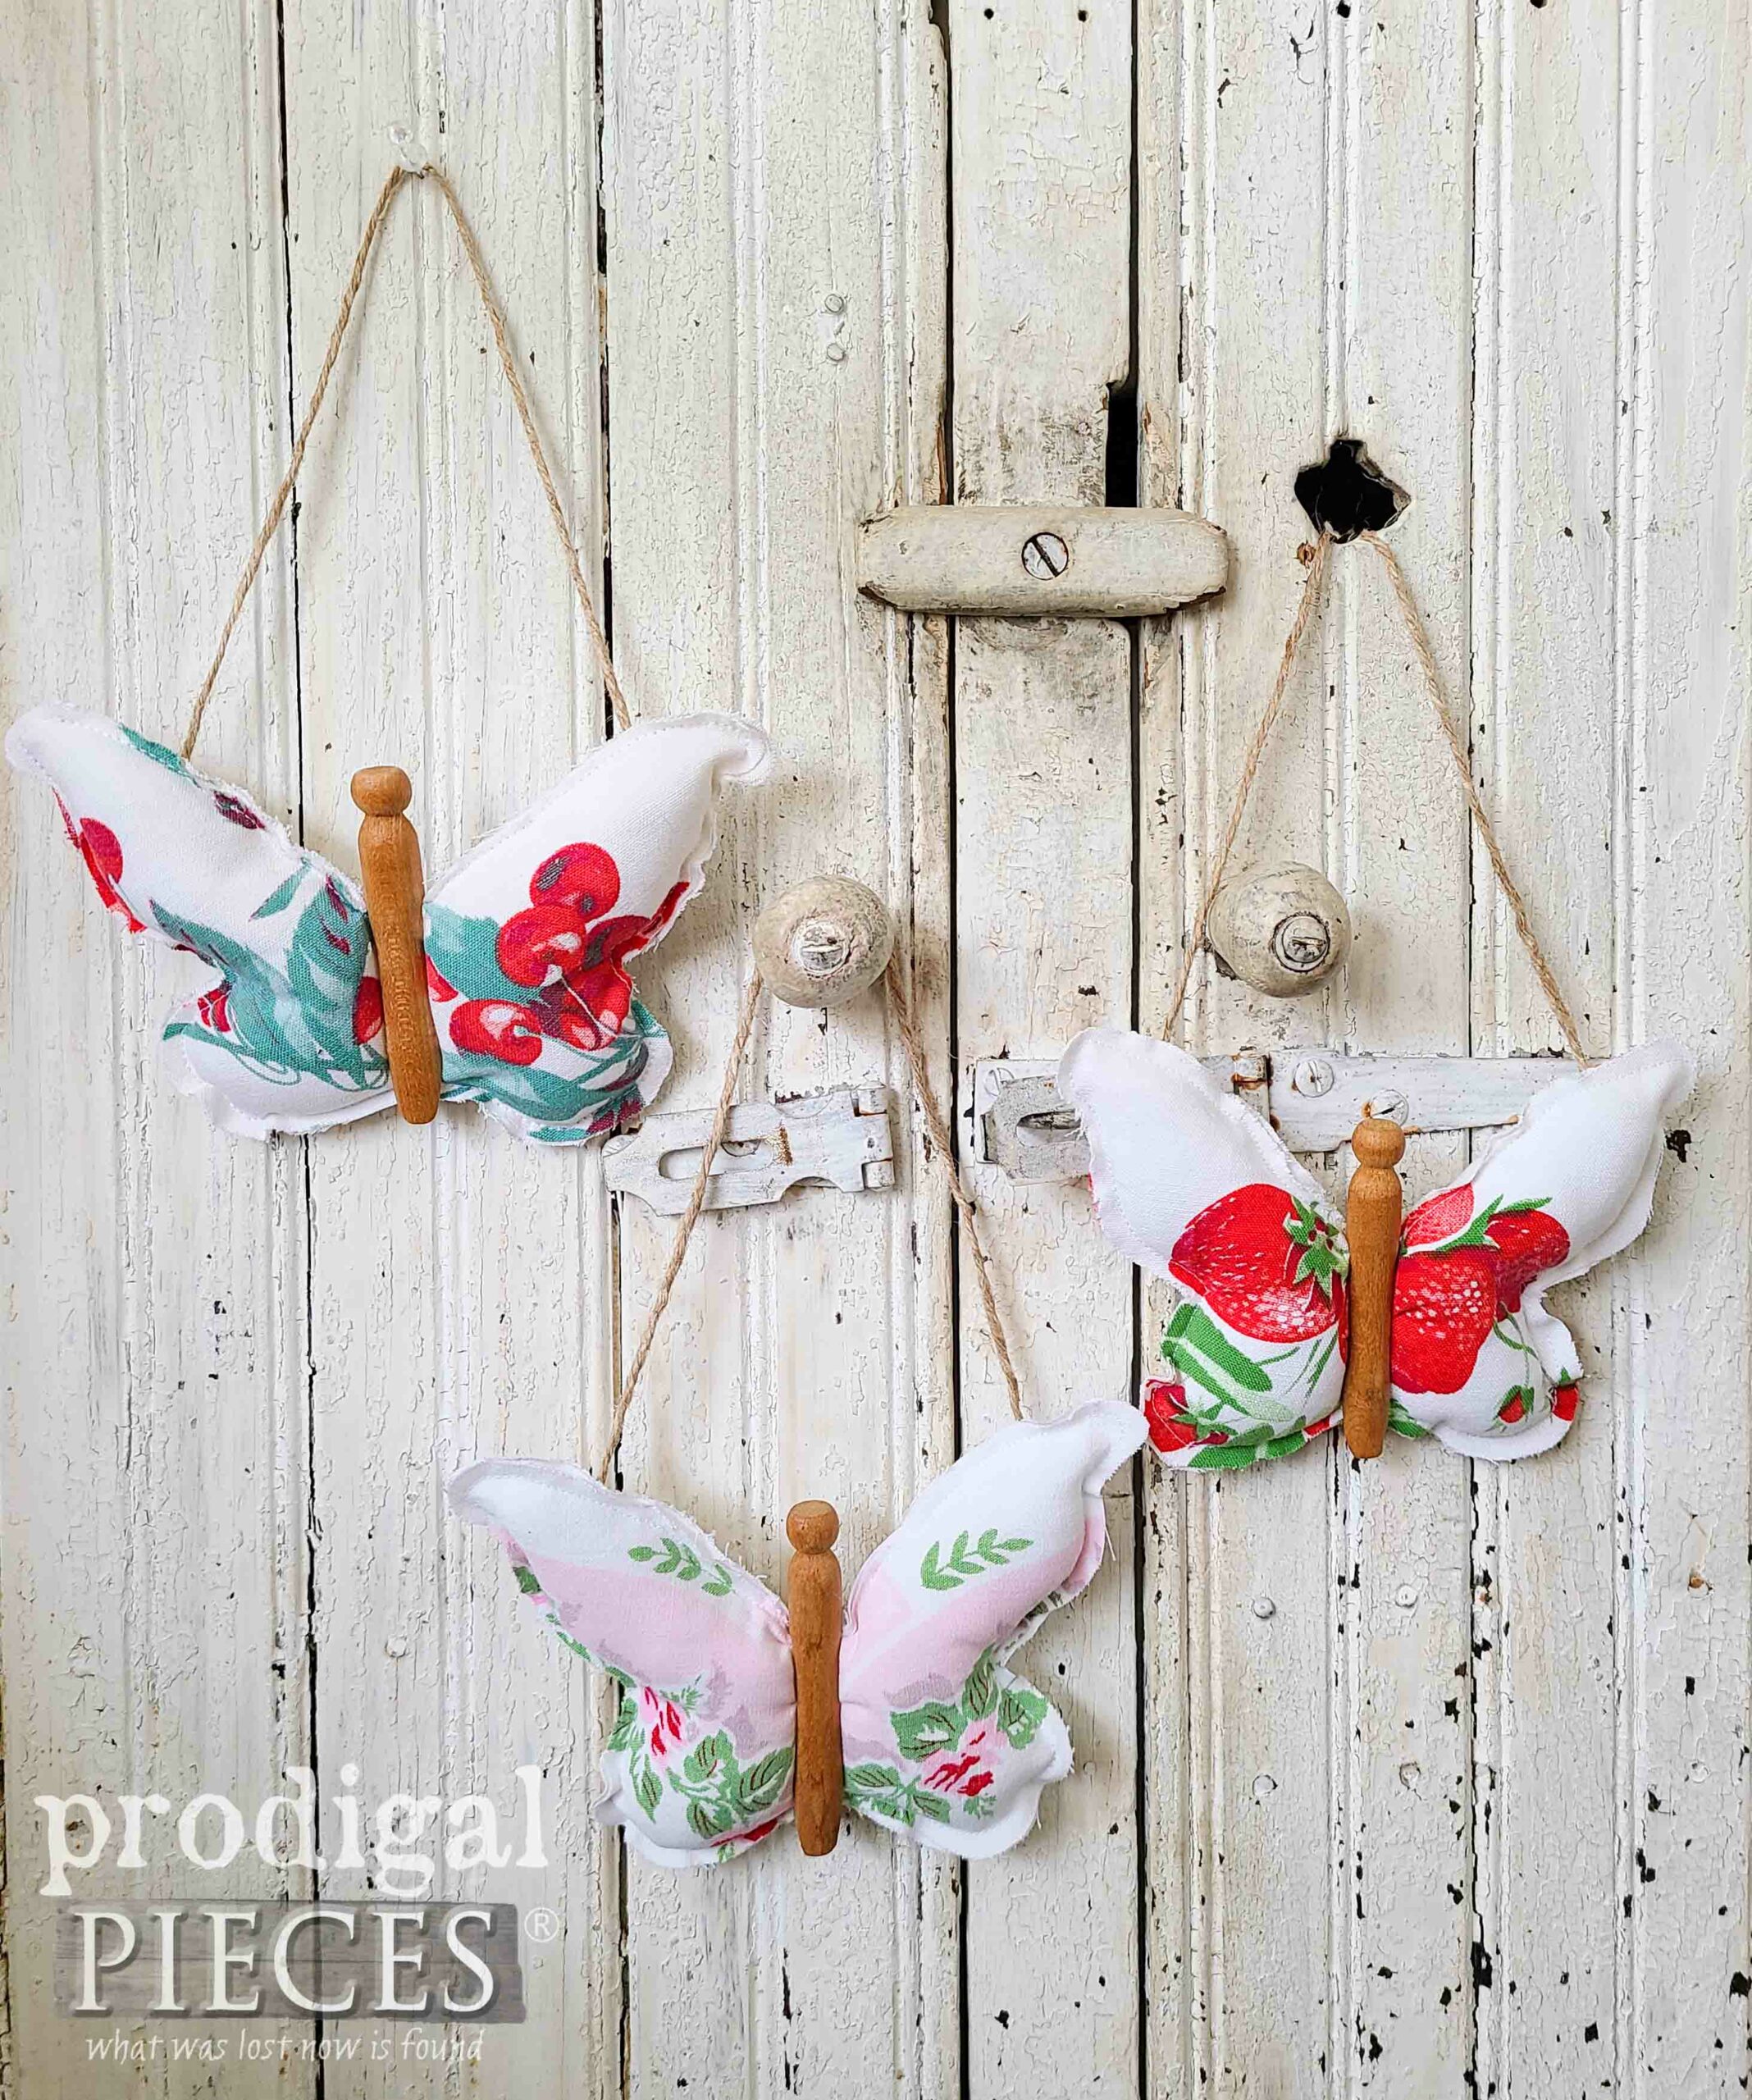 Handmade Clothespin Butterflies from Refashioned Tablecloth by Larissa of Prodigal Pieces | prodigalpieces.com #prodigalpieces